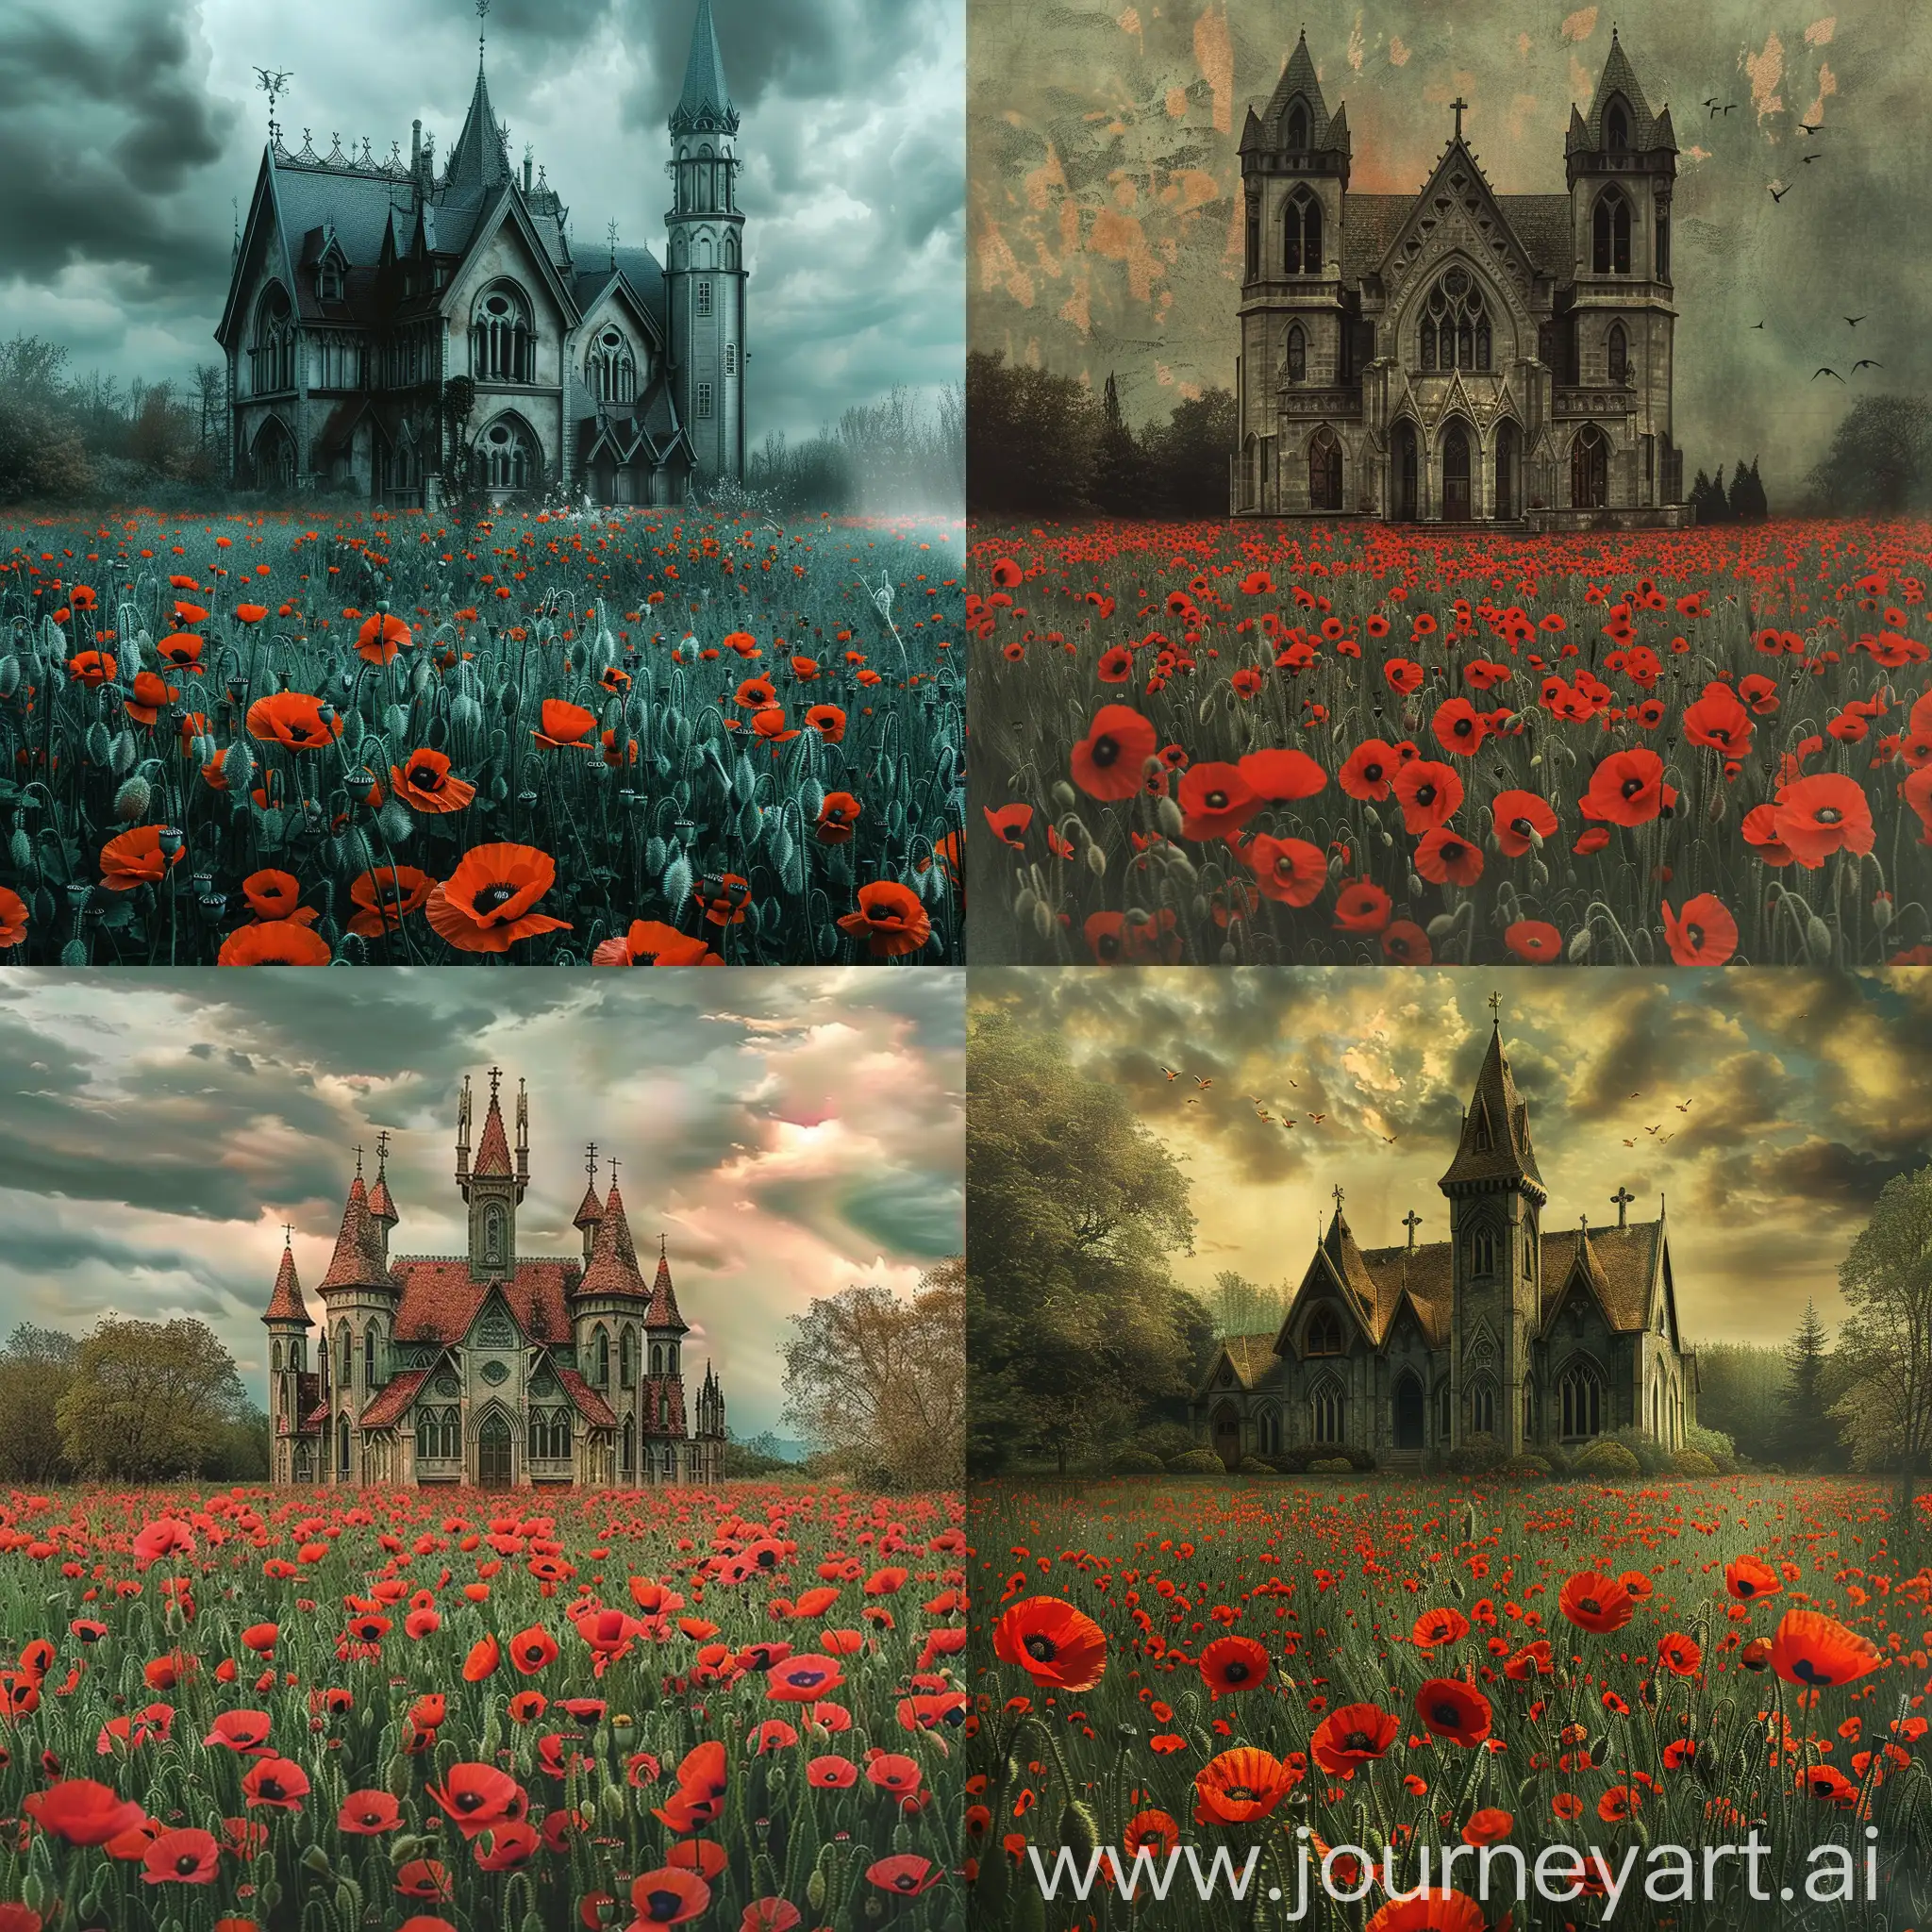 A gothic house of God encompassed by a field of poppies